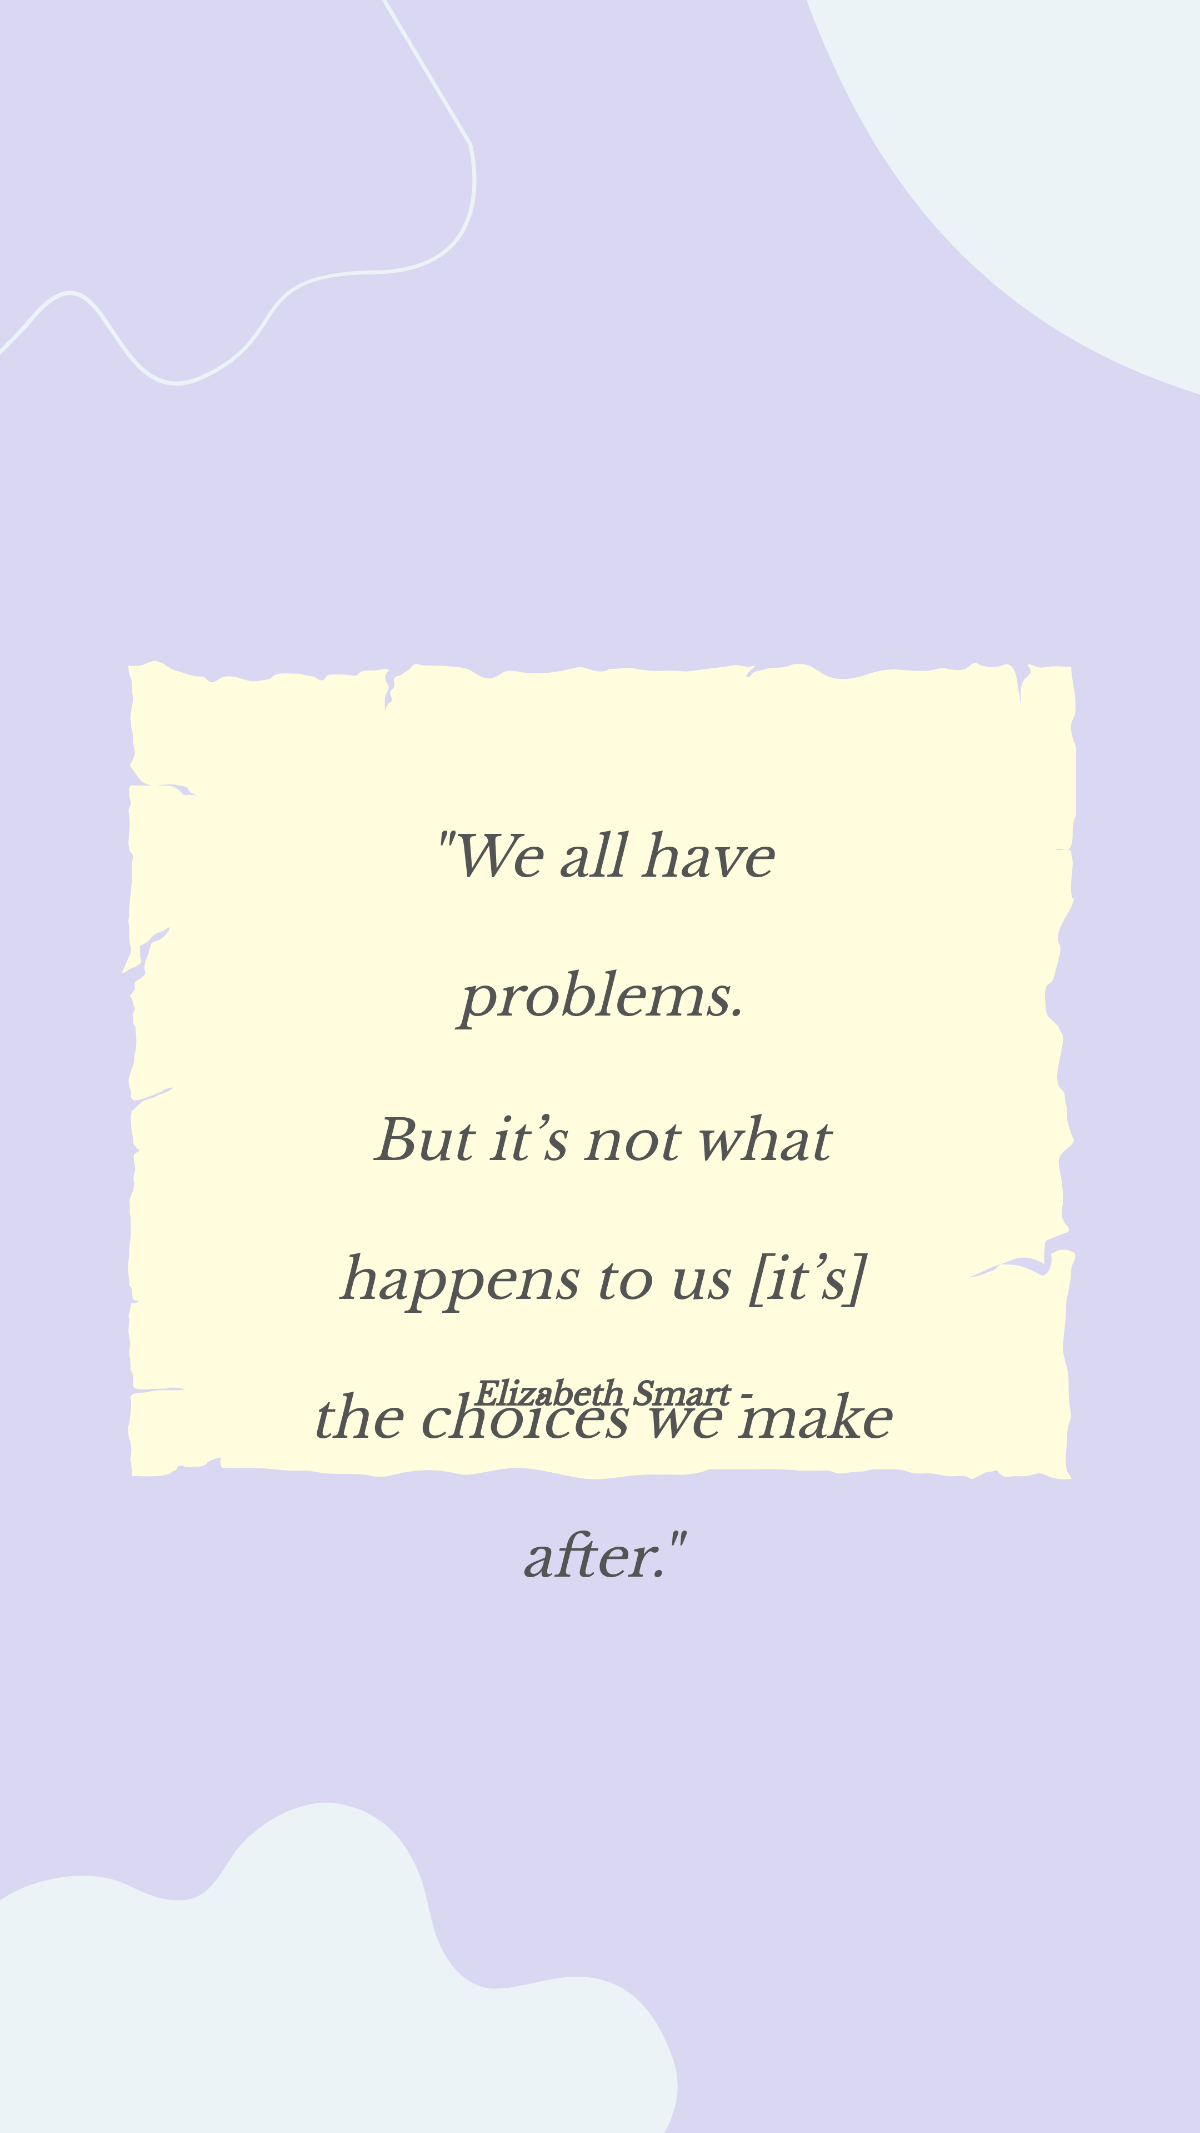 Elizabeth Smart - We all have problems. But it’s not what happens to us [it’s] the choices we make after.